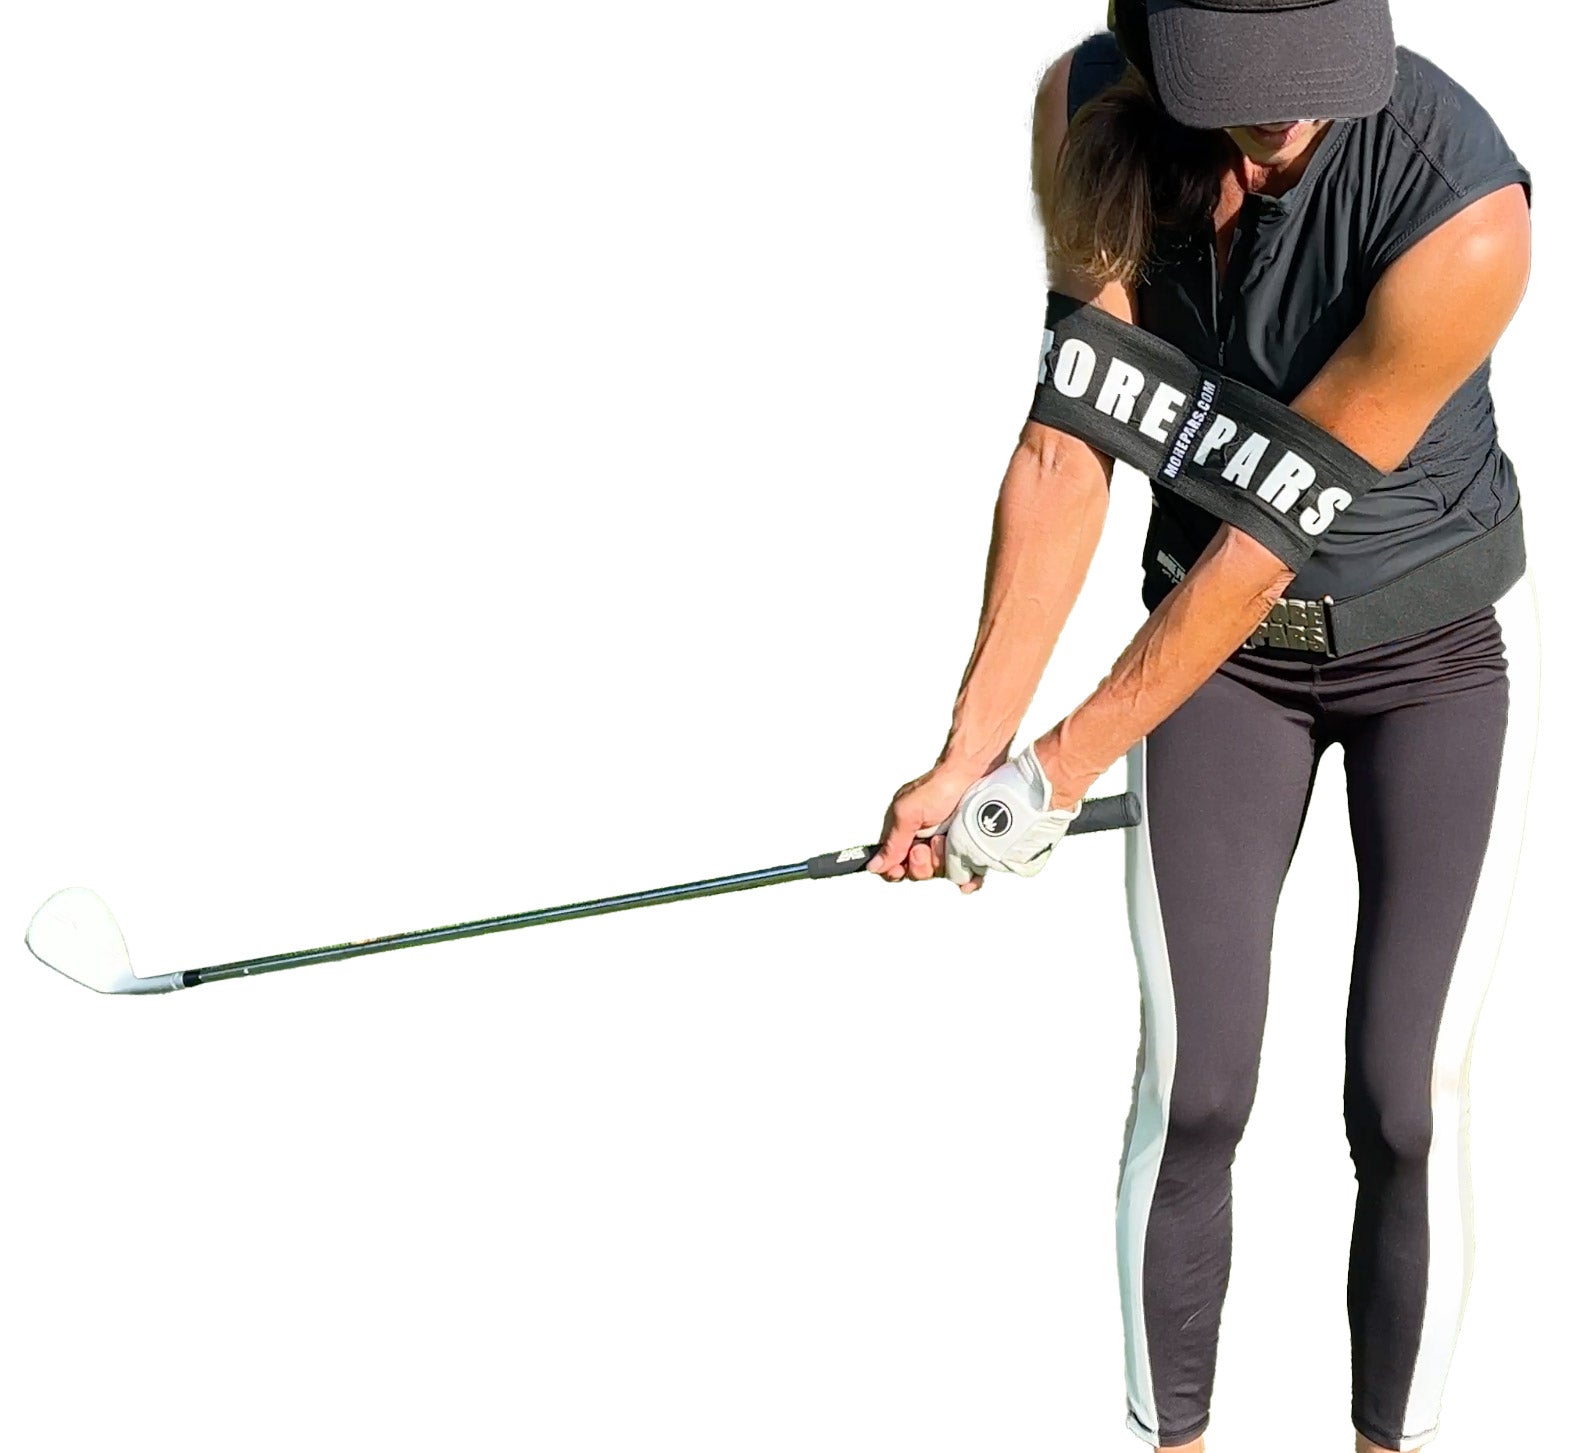 Arm Band with Mini-Rod for Long Game – MORE PARS